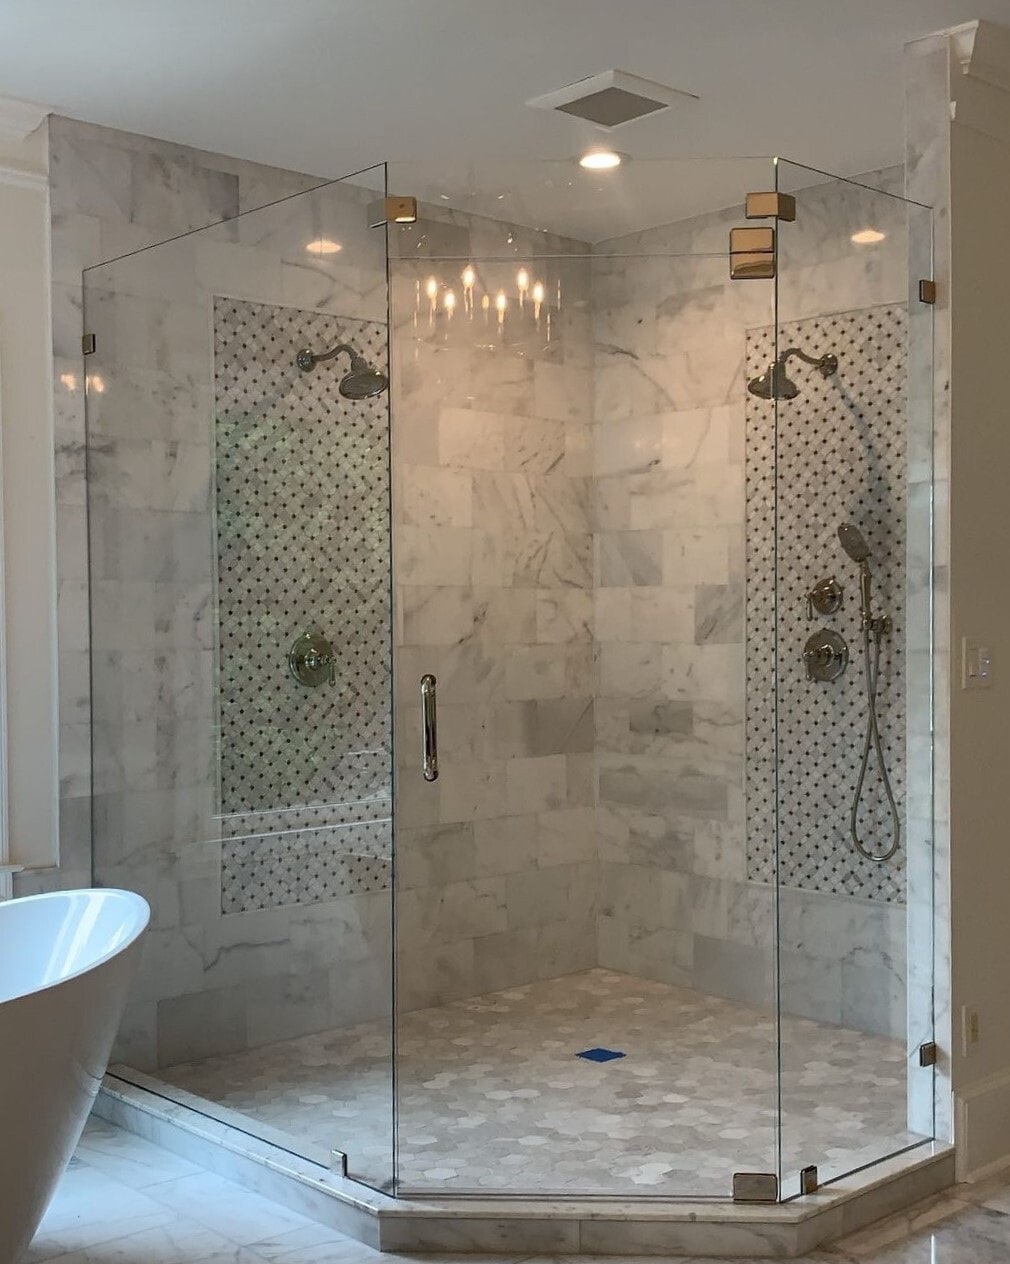 This low iron shower enclosure features a transom above the door to support its swing. Low iron glass is particularly stunning in light-colored bathrooms with a lot of natural lighting.